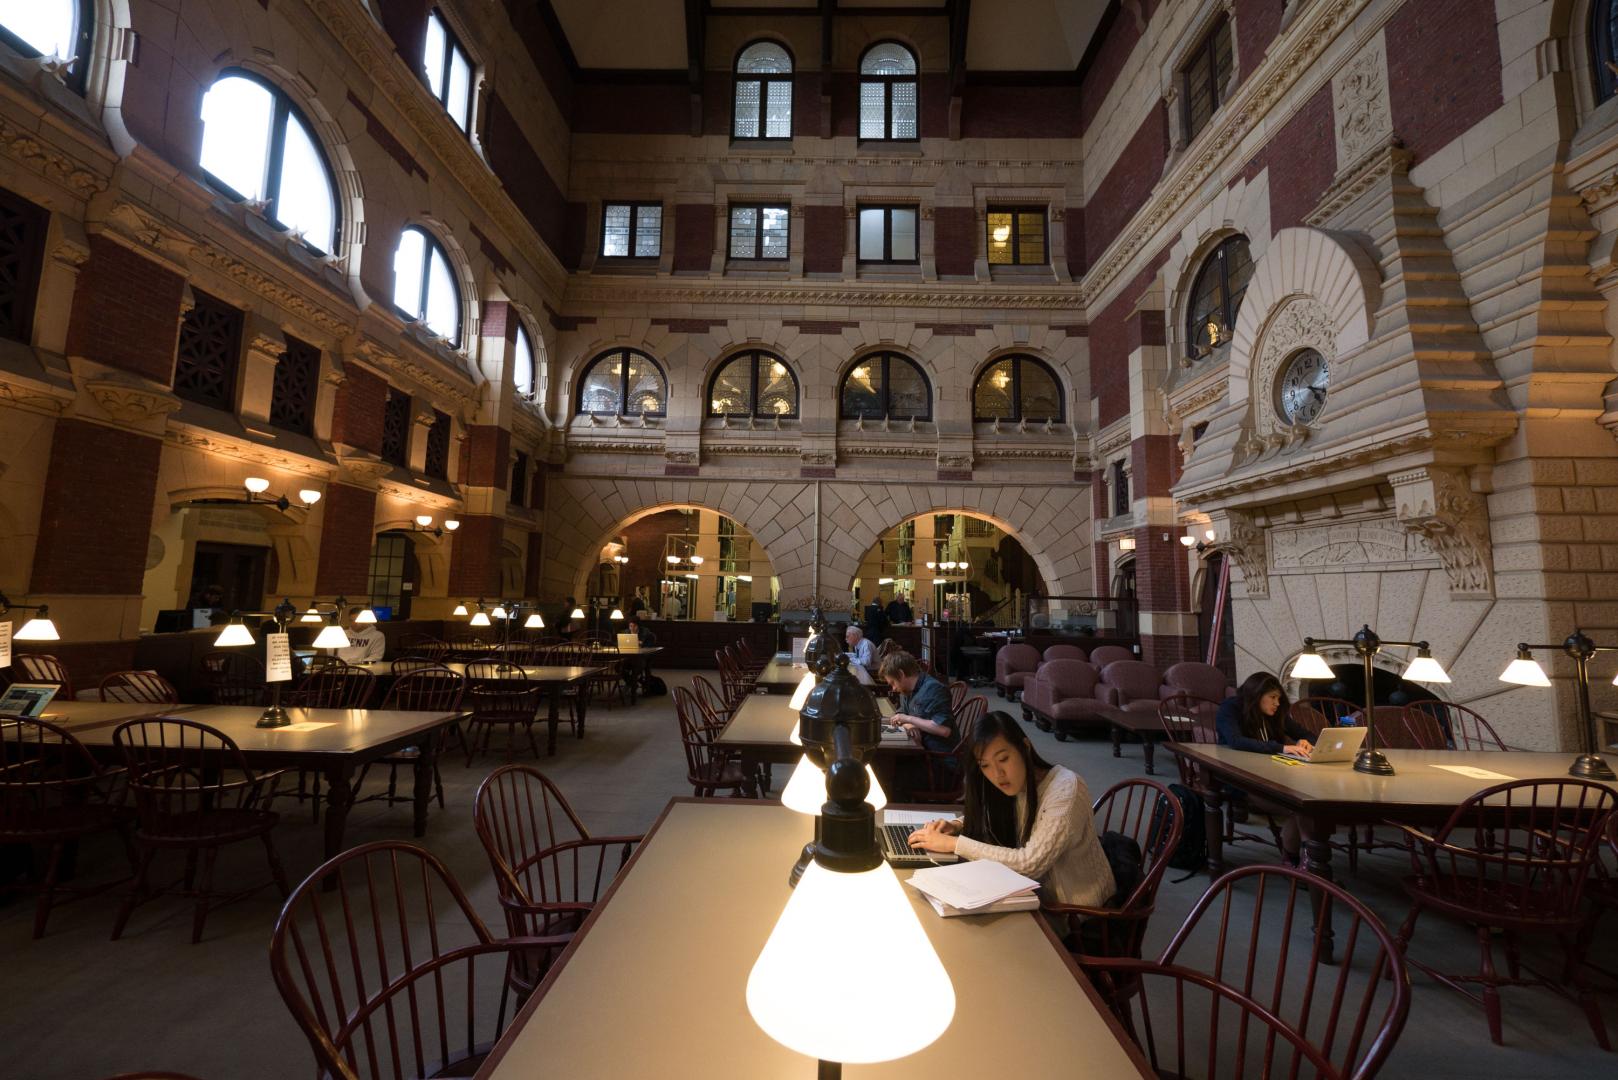 Fisher Fine Arts Library from the inside